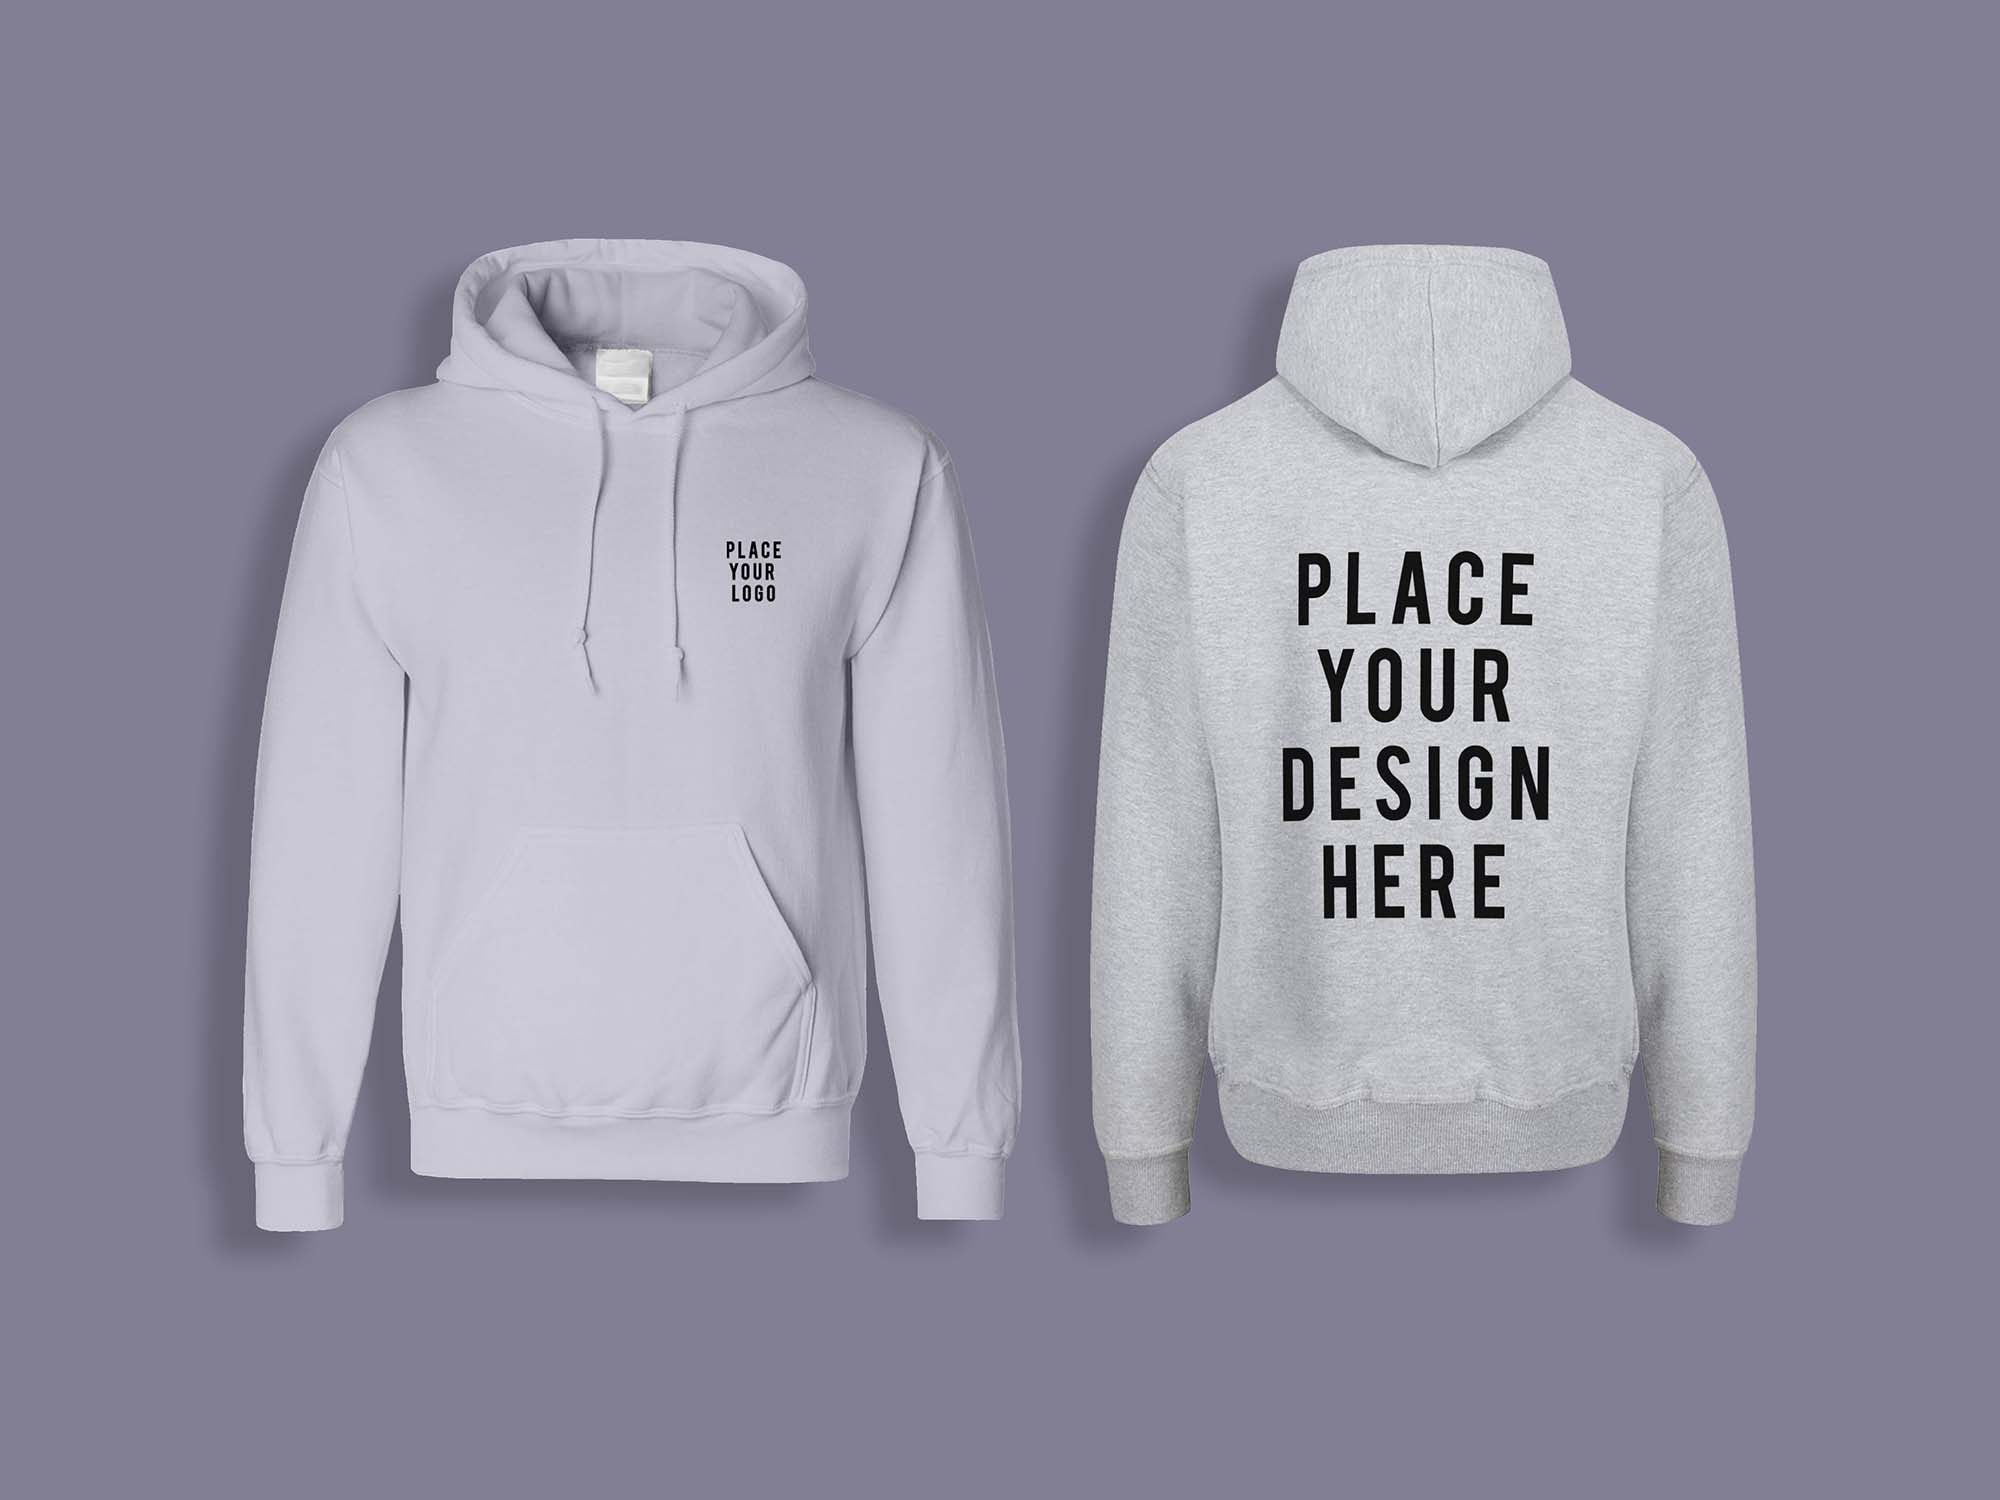 White hoodie mockup variant showing the front view with customizable design areas.